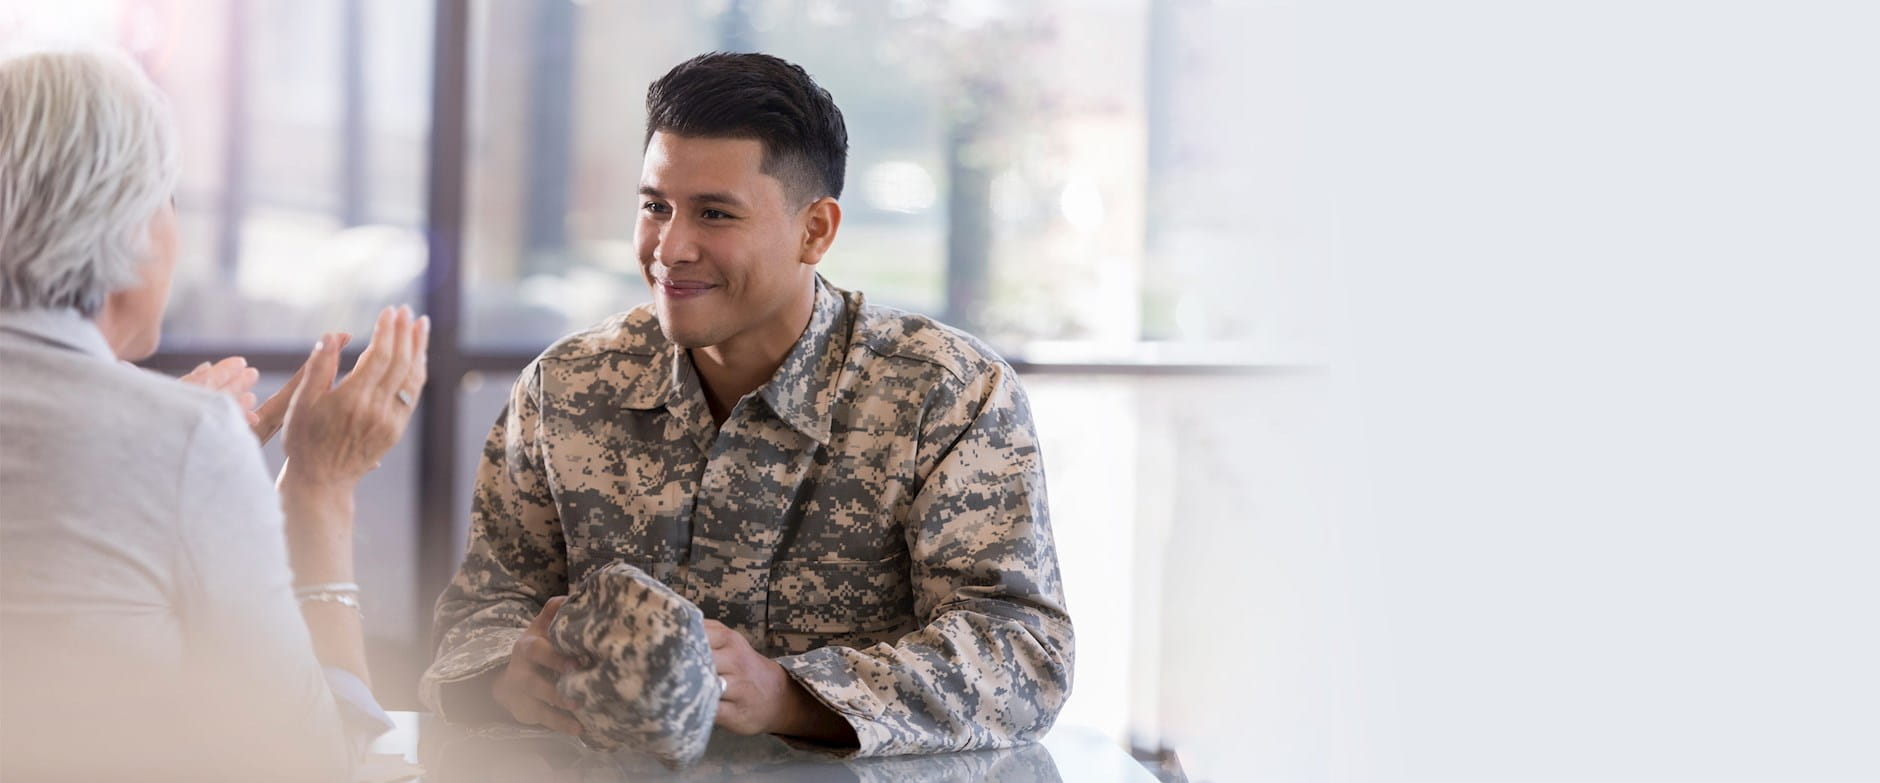 Smiling military man listening to woman